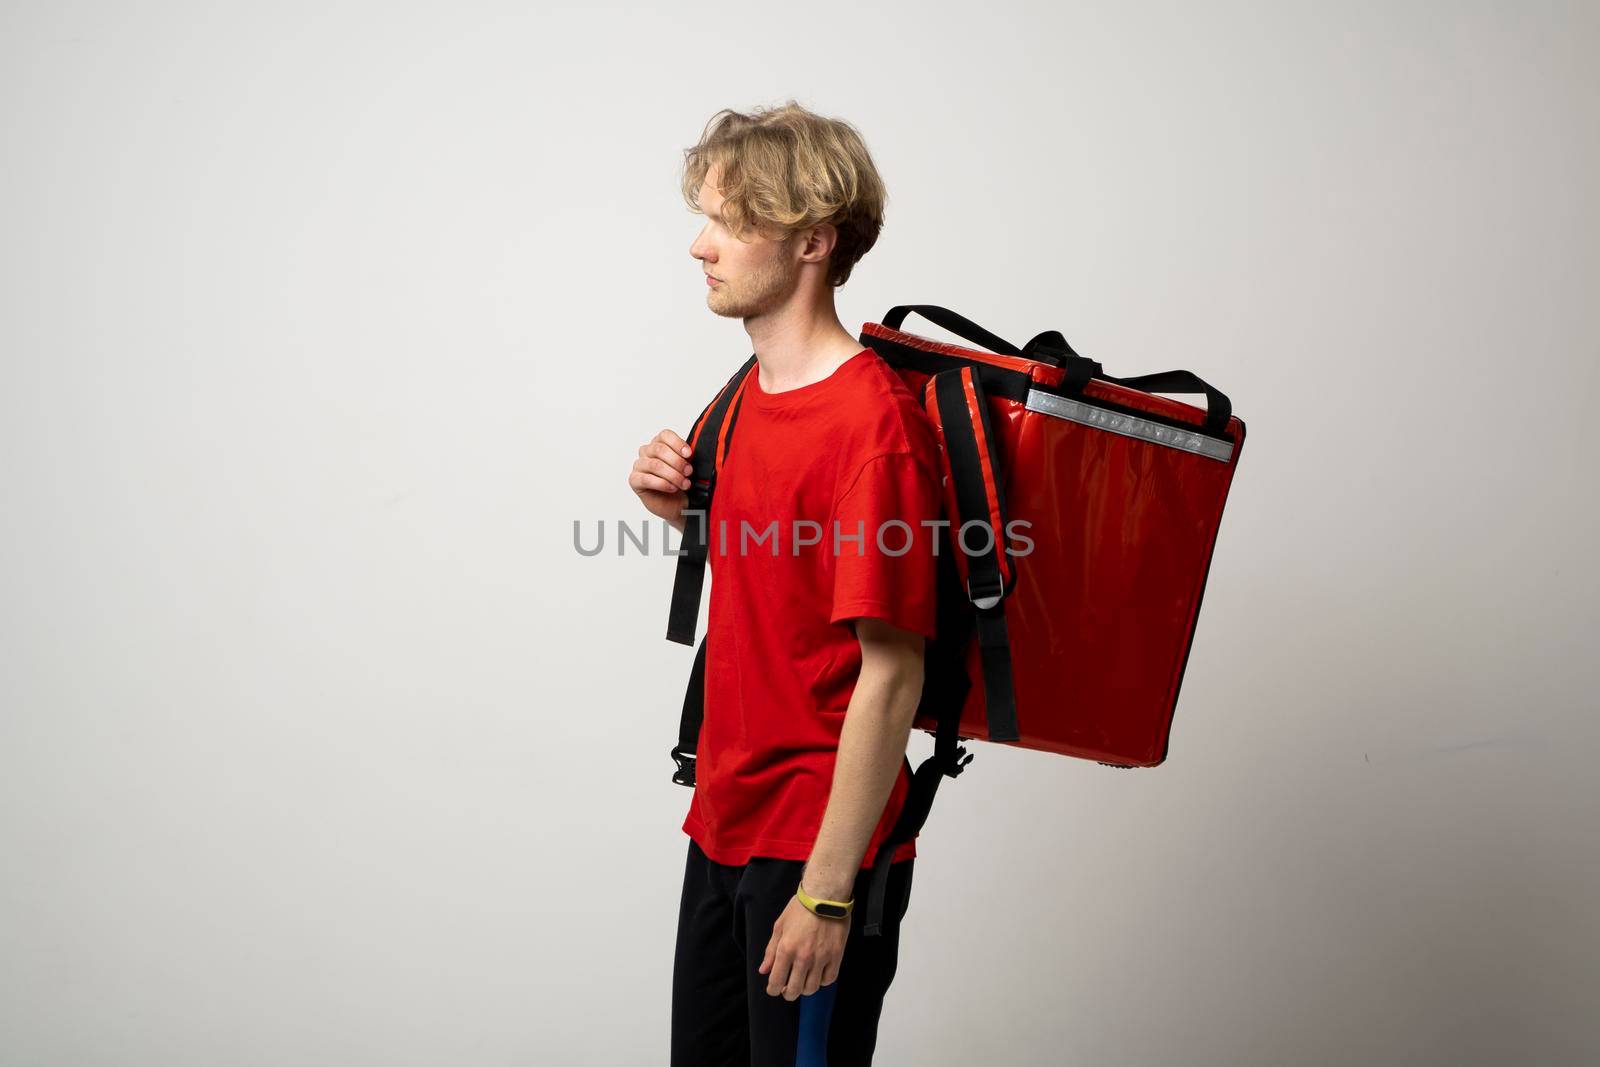 Portrait of a young courier, delivery man in red uniform with a thermal backpack isolated on a white background. Fast home delivery. Online order. Courier delivers groceries home